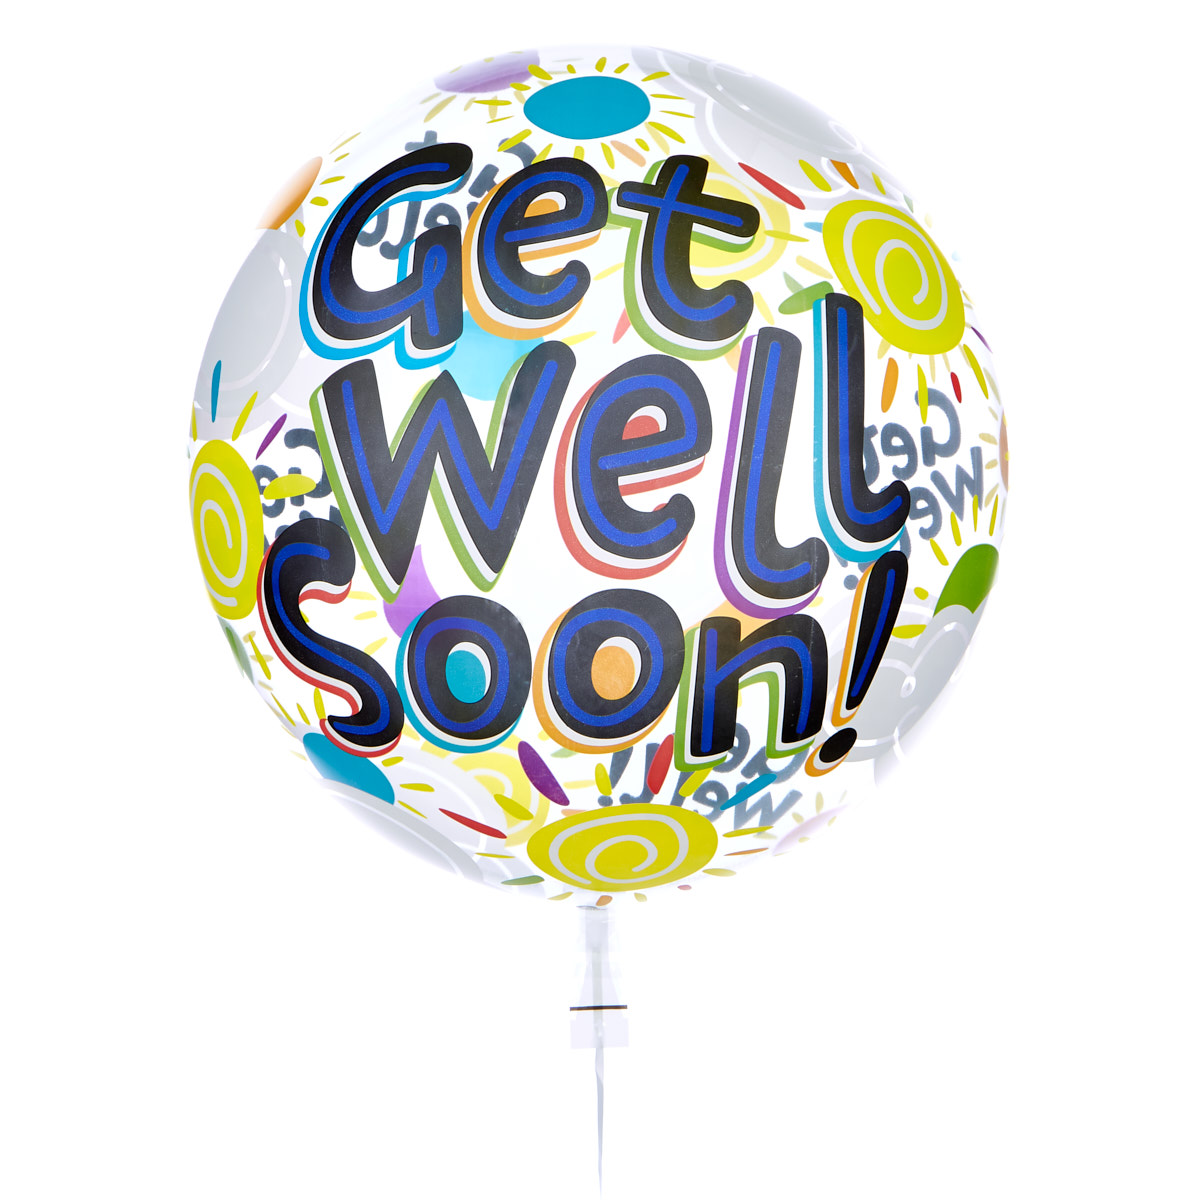 22-Inch Bubble Balloon - Get Well Soon - DELIVERED INFLATED! 